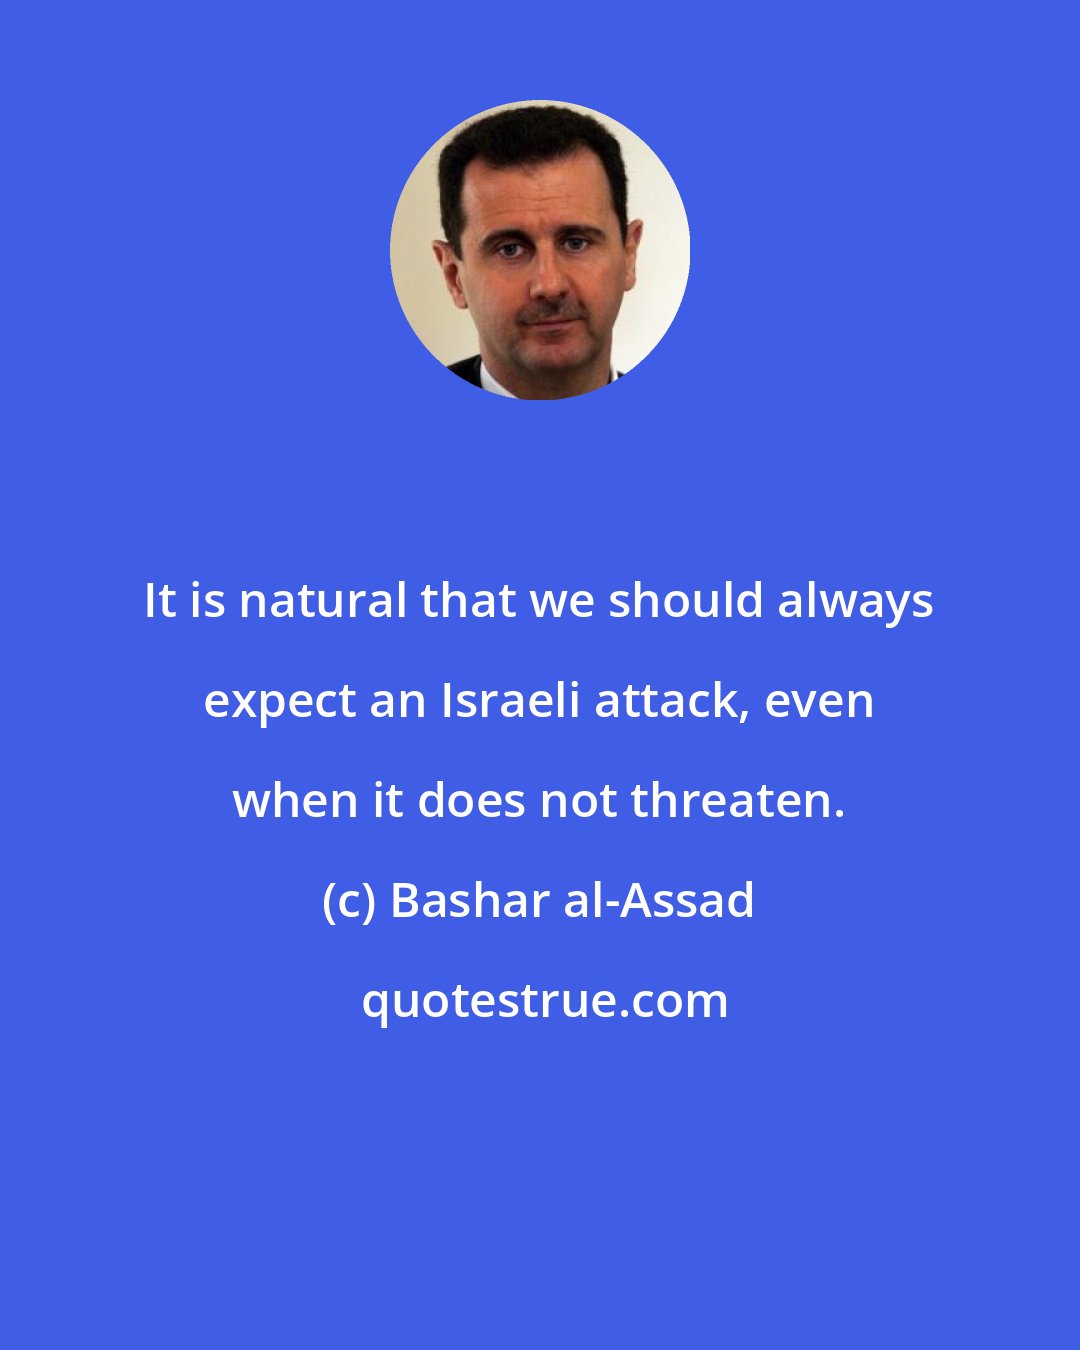 Bashar al-Assad: It is natural that we should always expect an Israeli attack, even when it does not threaten.